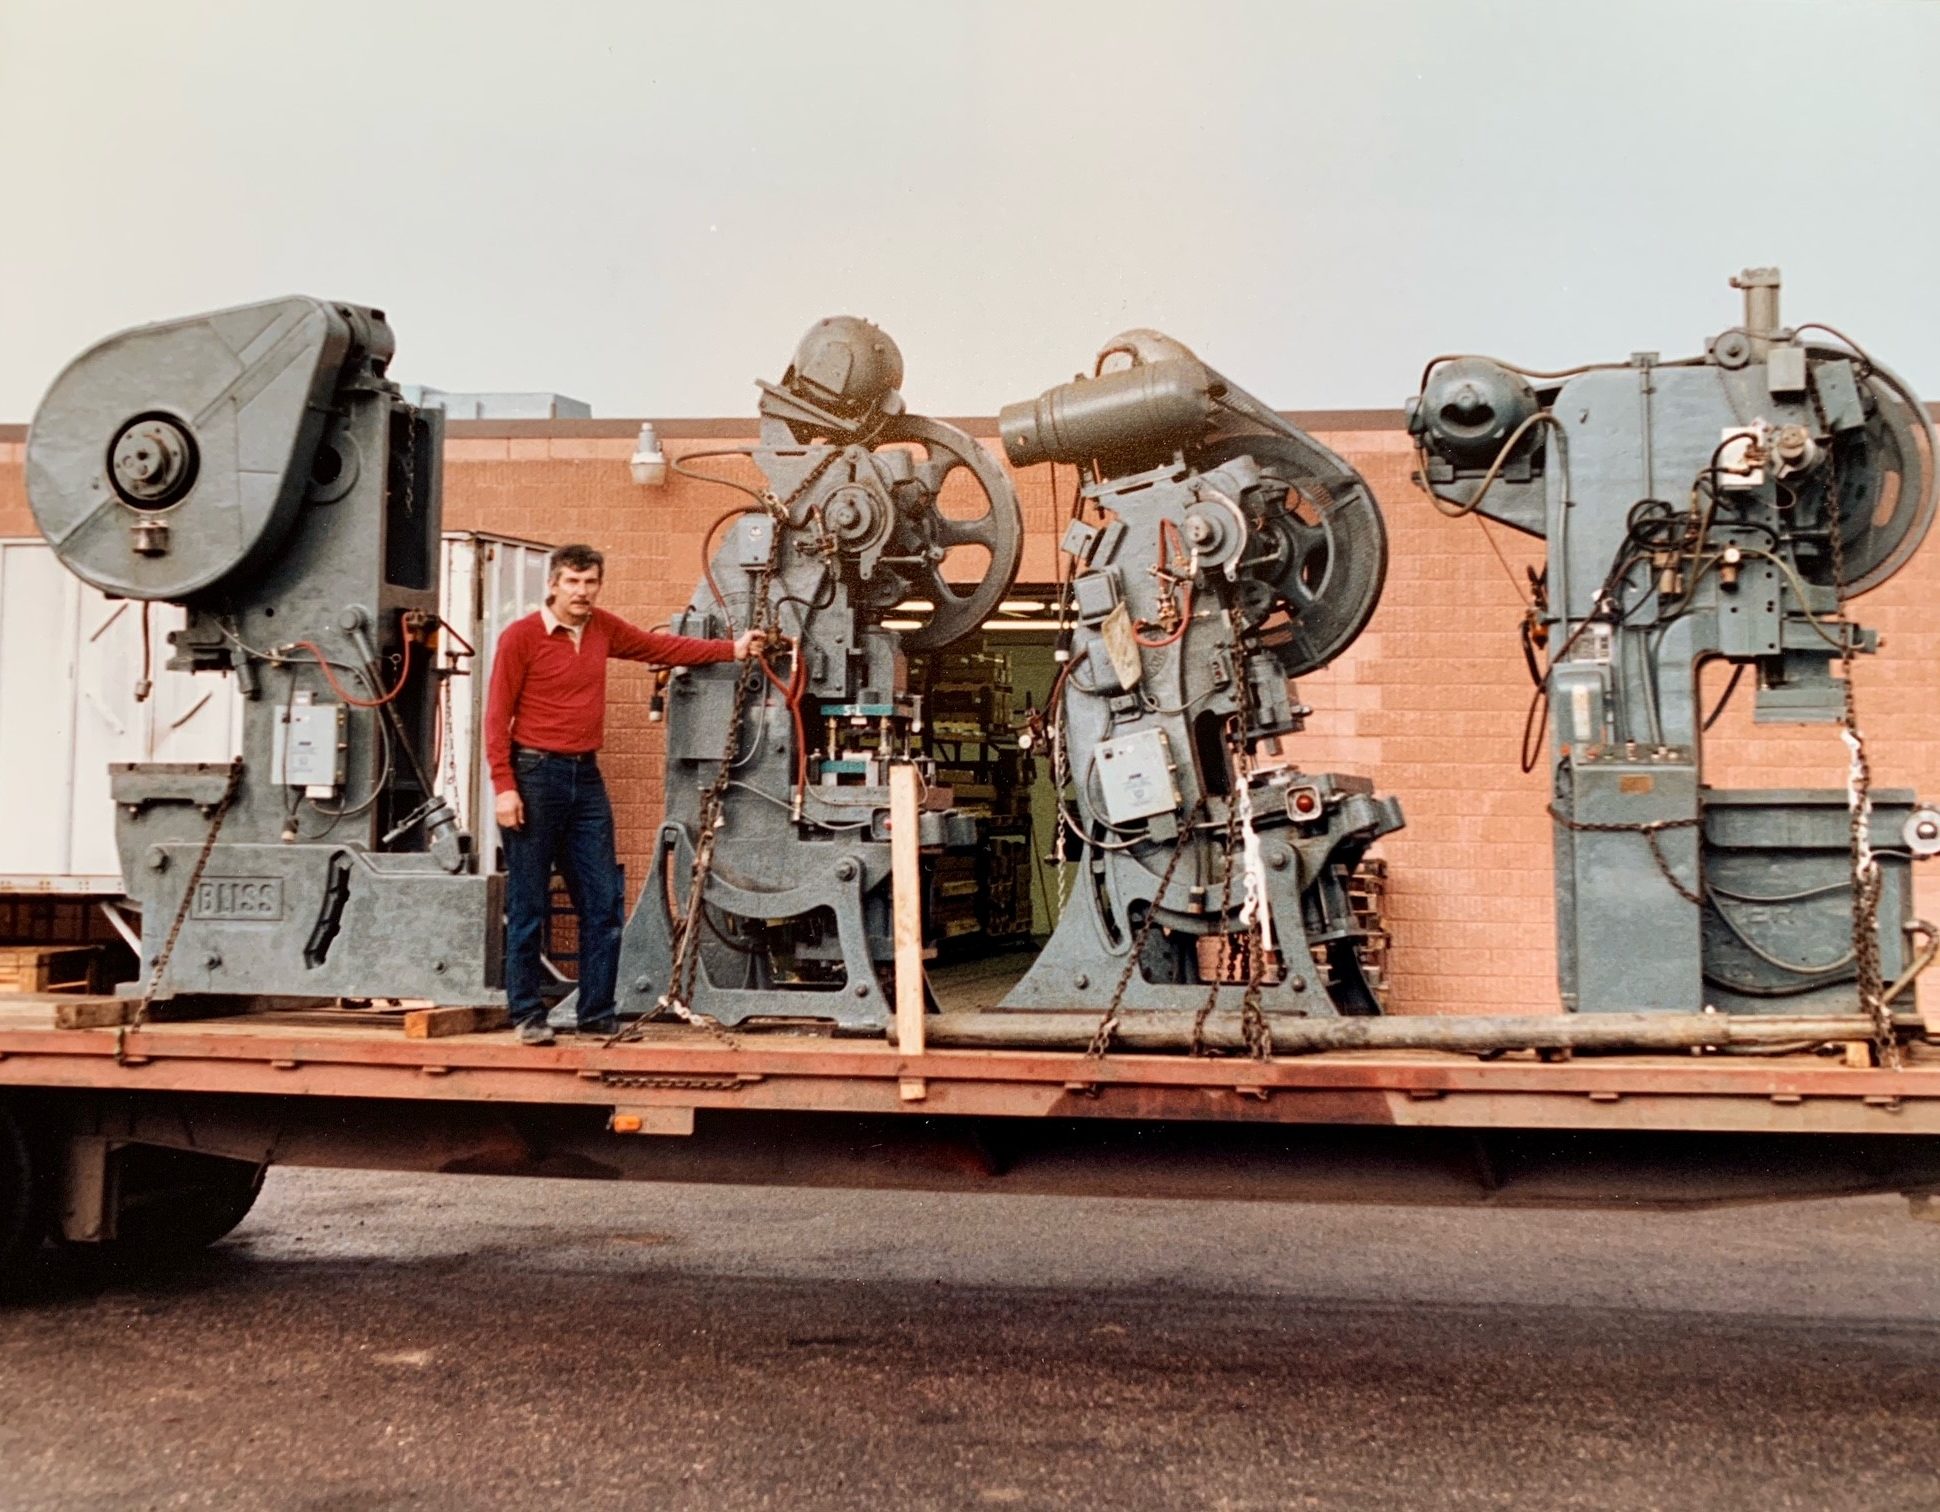 Sheldon Ajax atop a truckload of stamping presses purchased by the company to increase stamping capabilities, circa 1960